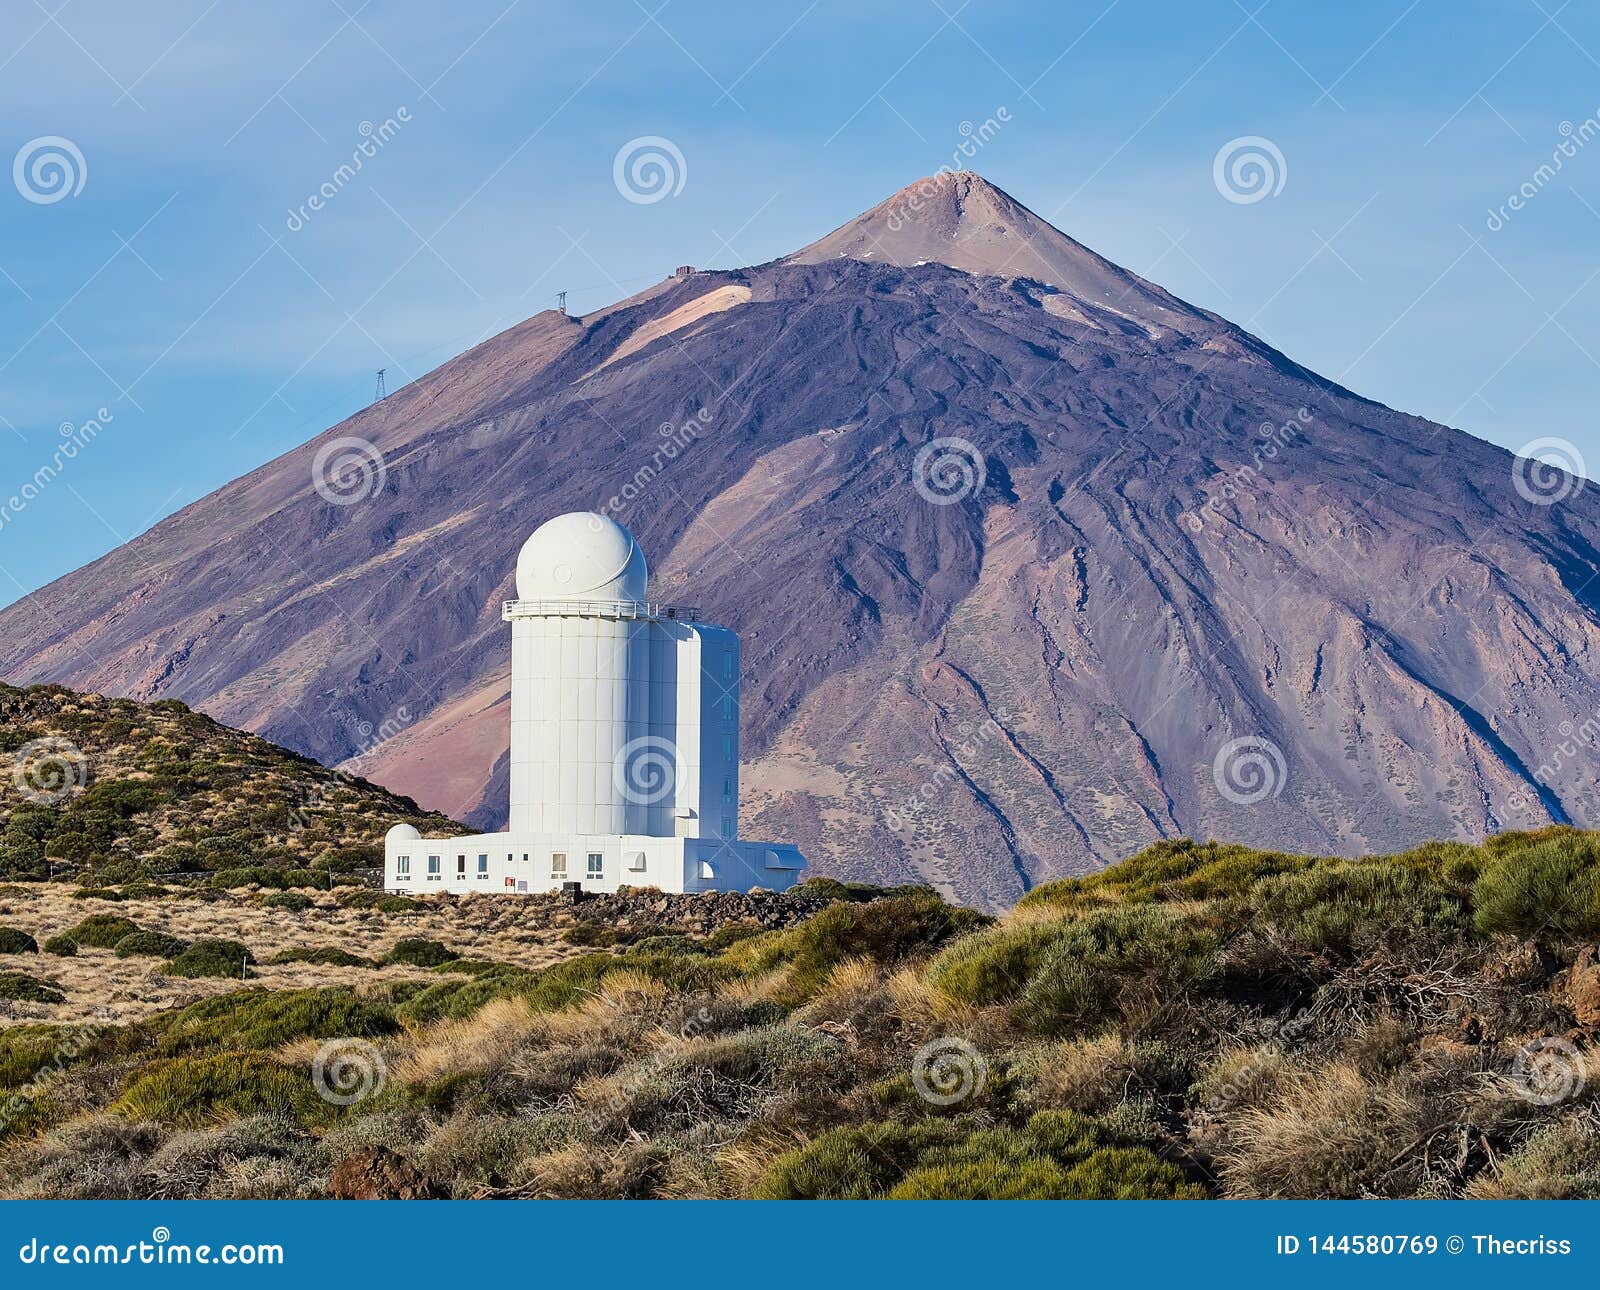 view of the observatory with mount teide to the rear observatorio del teide, tenerife, canary islands, spain